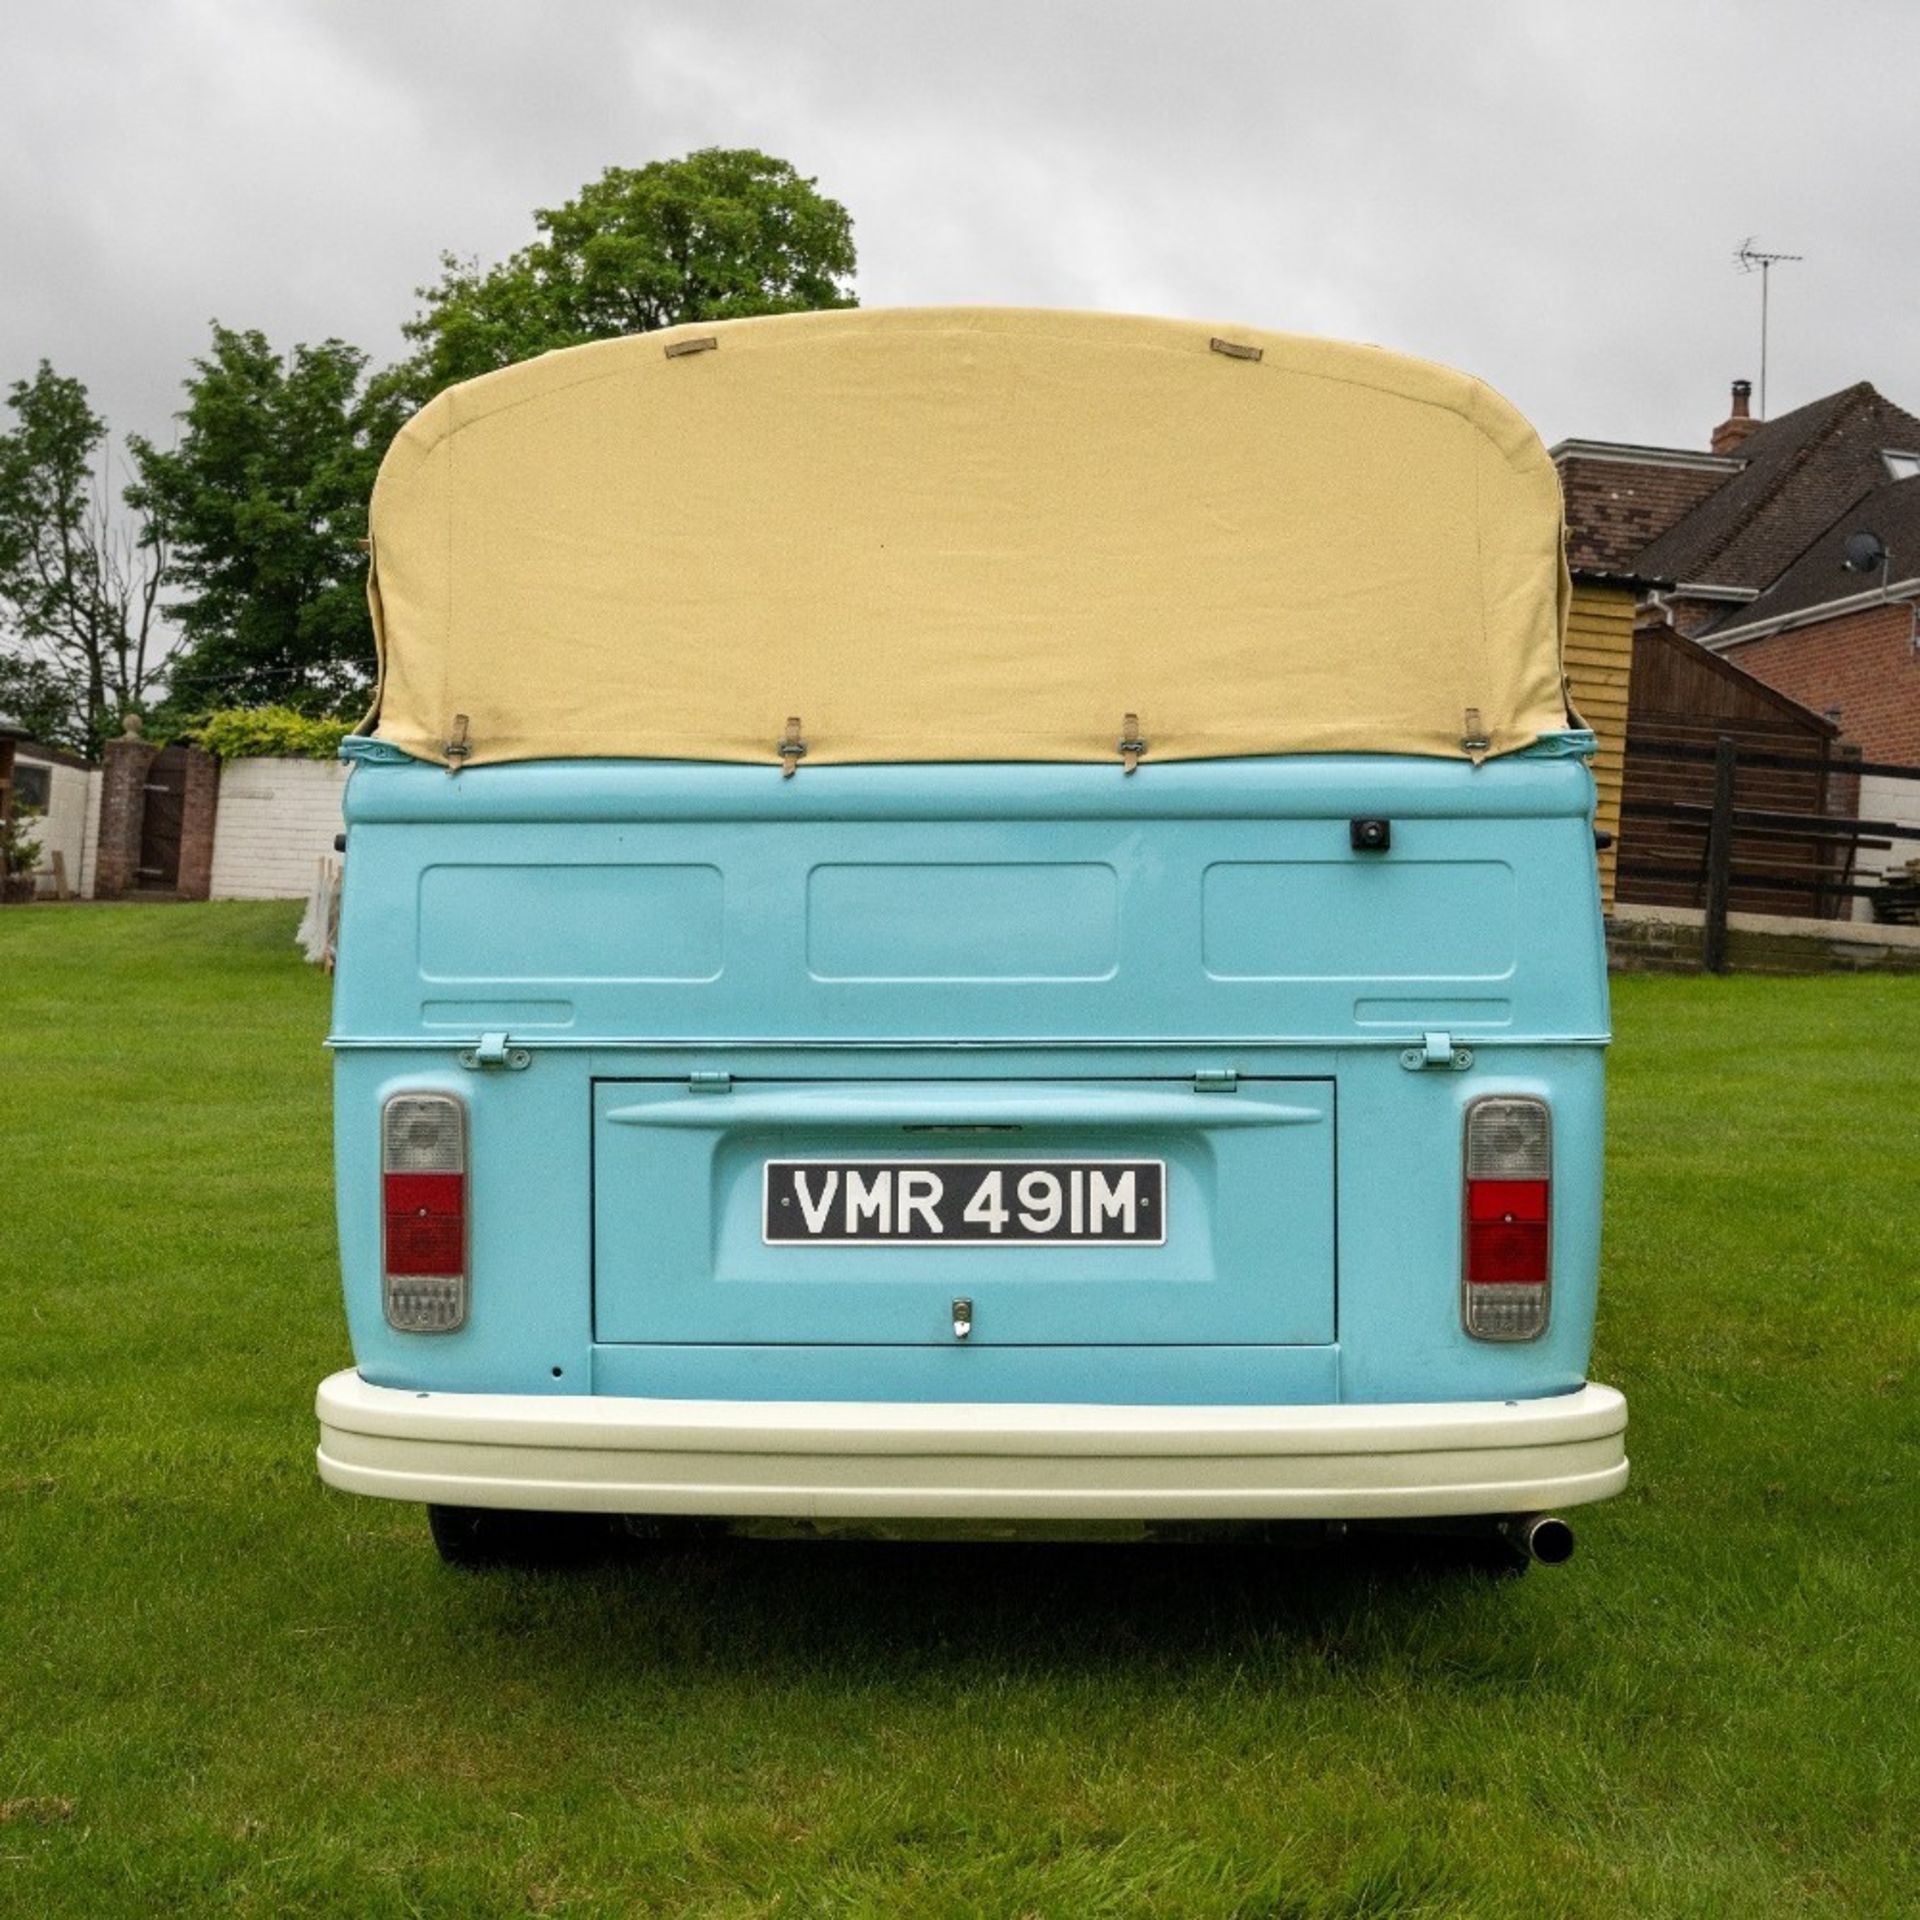 1974 VOLKSWAGEN TYPE 2 DOUBLE-CAB PICKUP Registration Number: VMR 491M Chassis Number: 2642-126- - Image 6 of 20